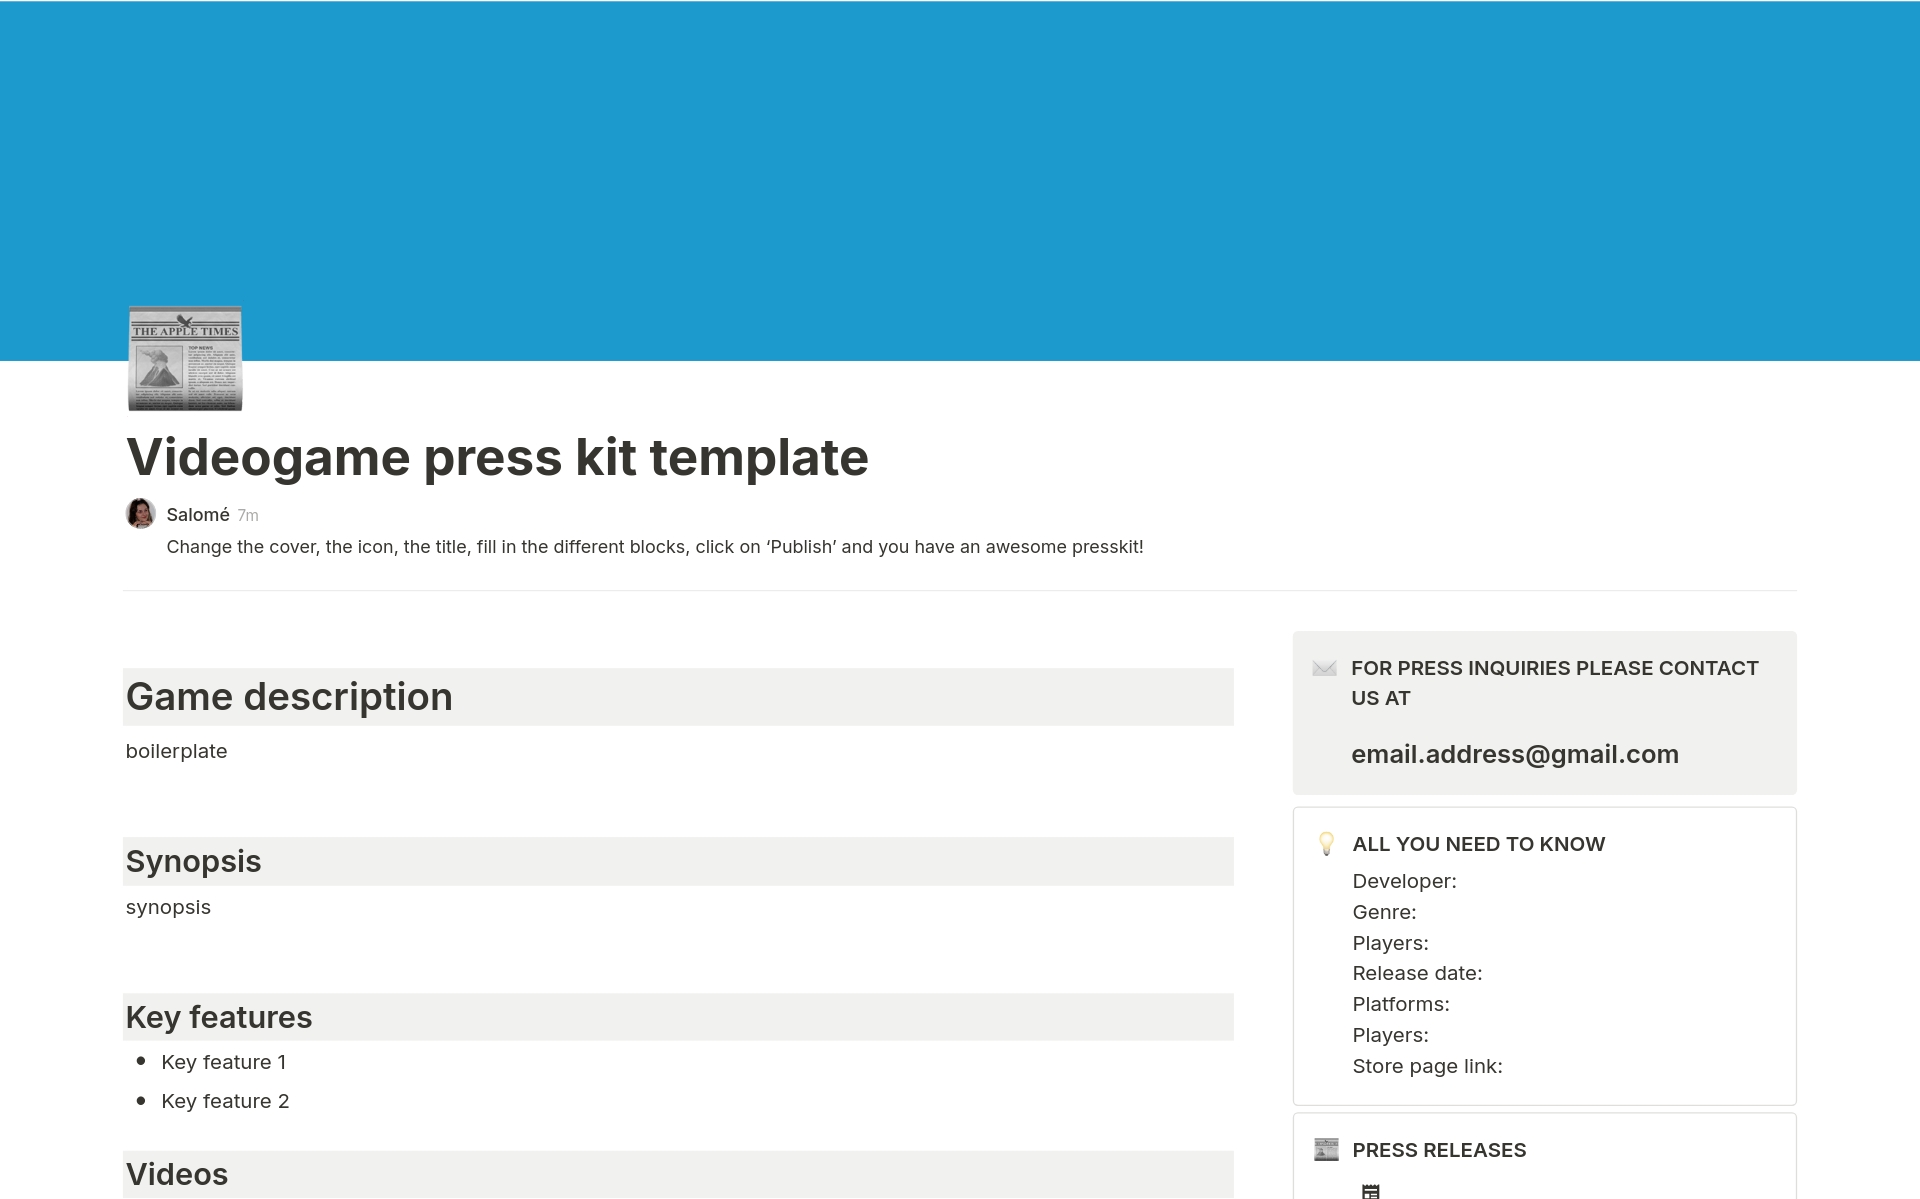 This template is the all-in-one solution for your videogame press kit.
Change the cover, the icon, the title, fill in the different blocks, click on ‘Publish’ and you have an awesome presskit!